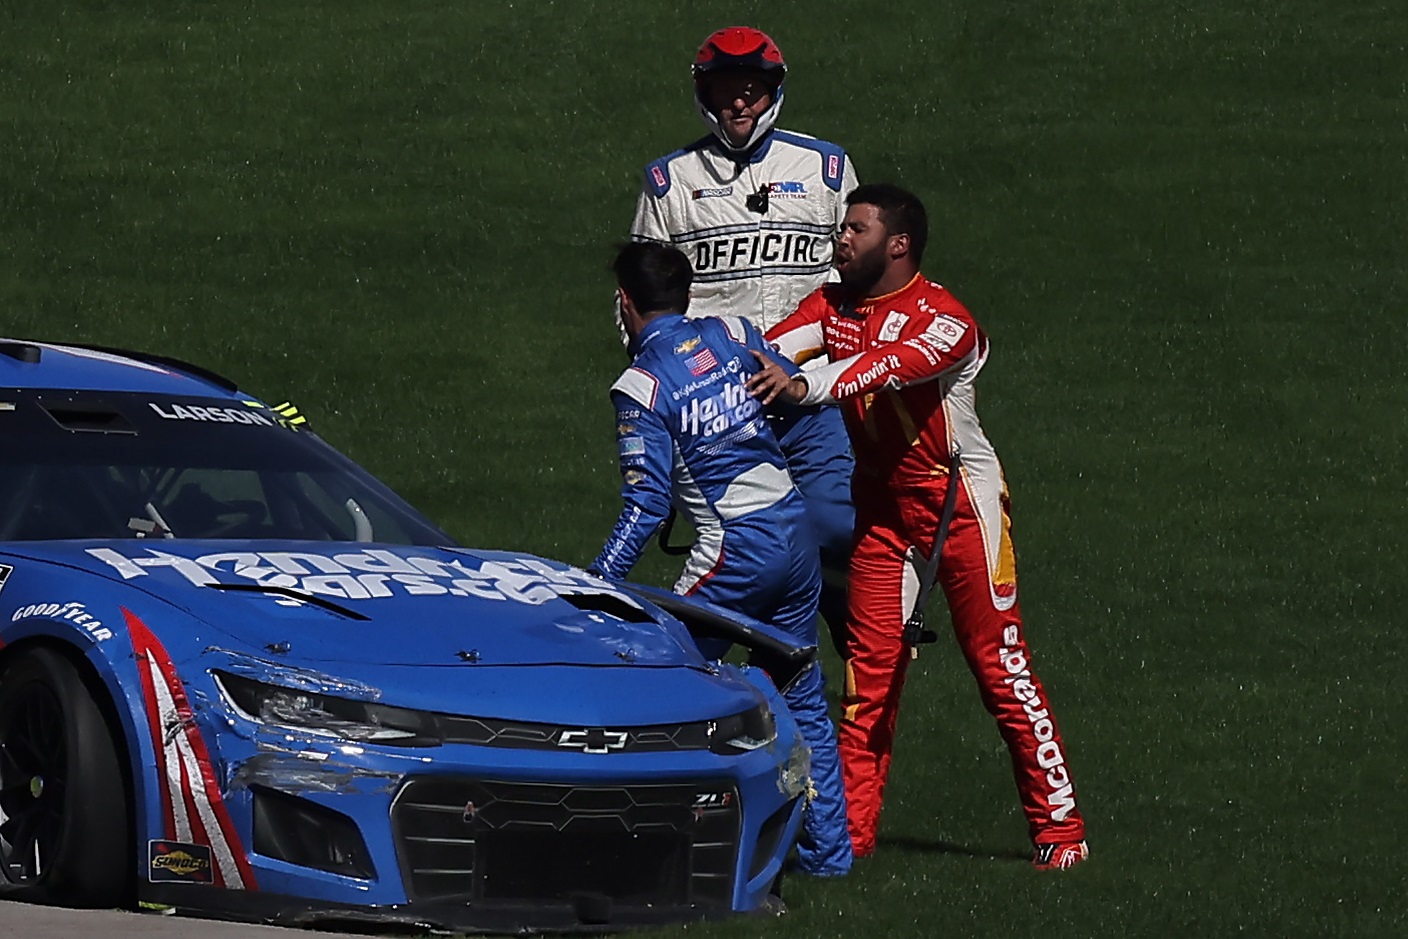 Bubba Wallace confronts Kyle Larson after a wreck during the NASCAR Cup Series South Point 400 at Las Vegas Motor Speedway on Oct. 16, 2022. | Jonathan Bachman/Getty Images